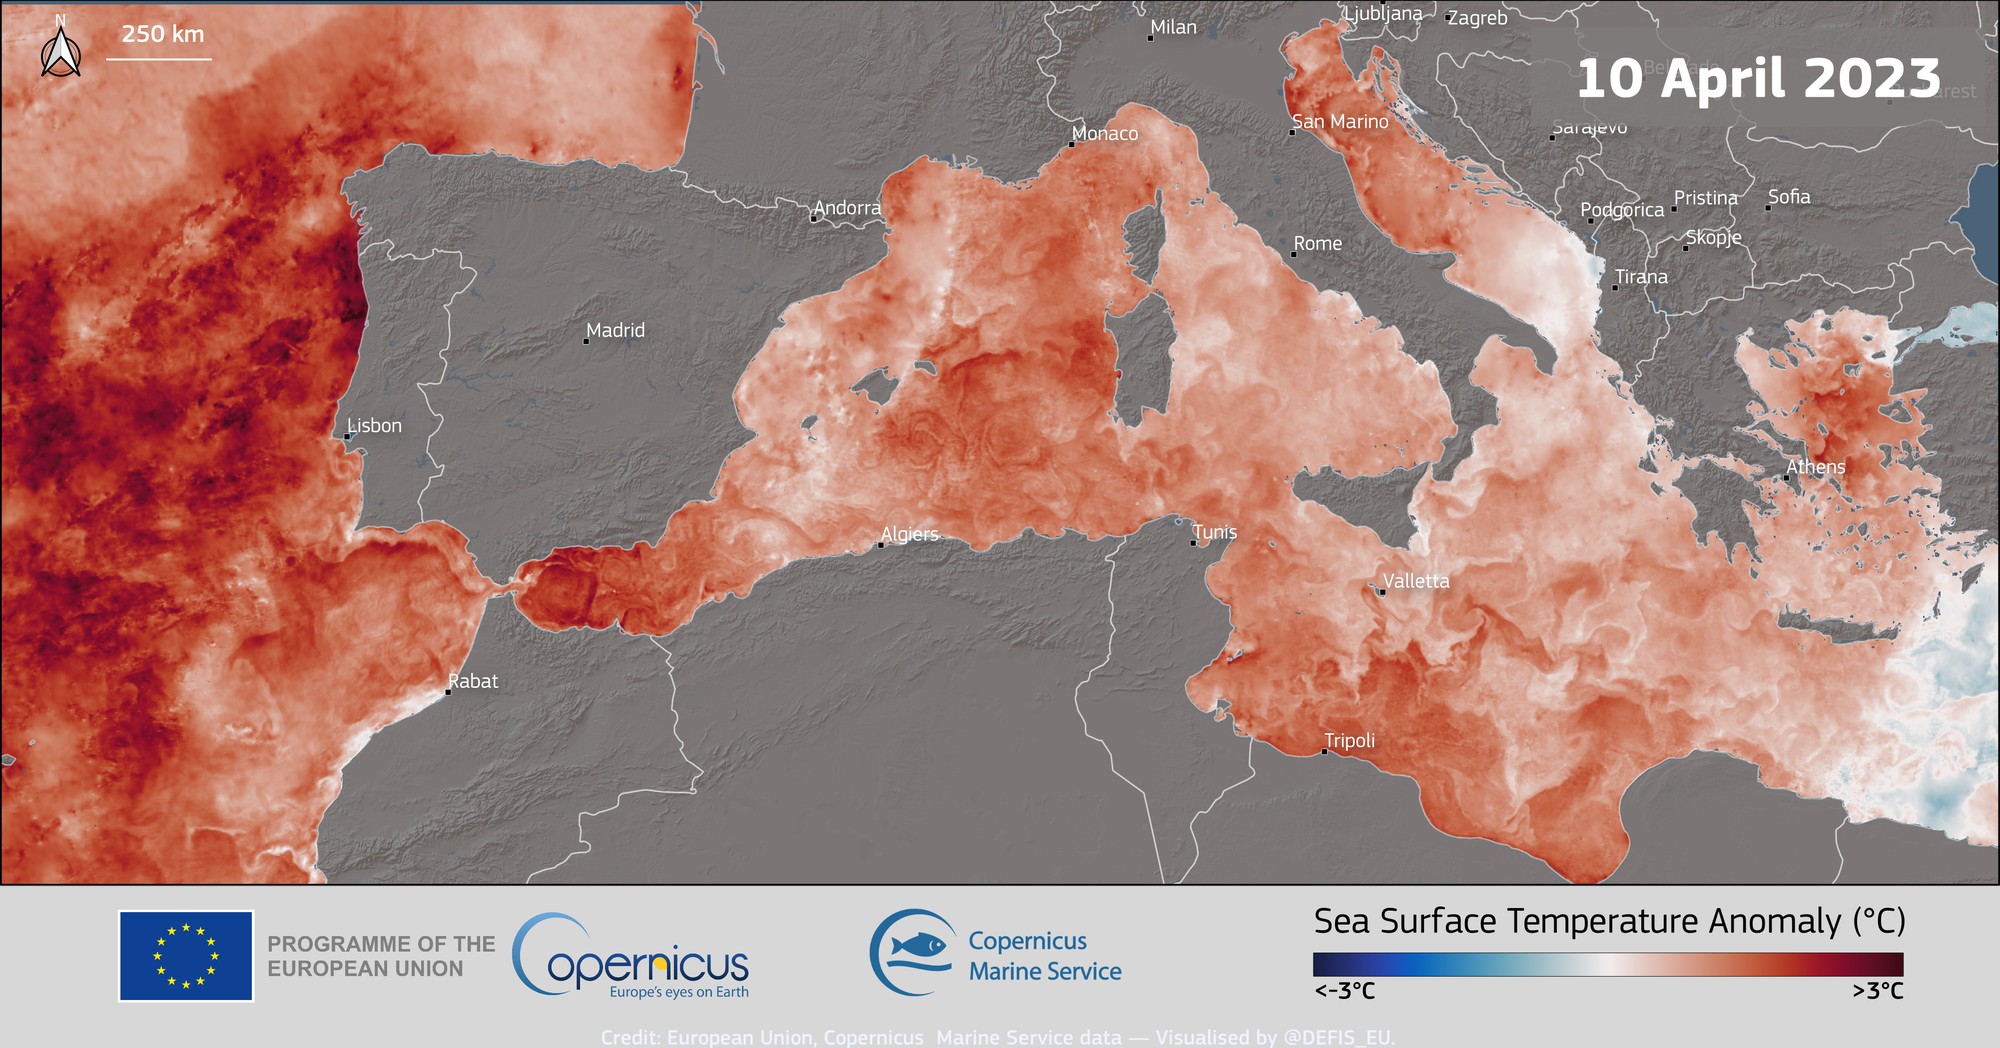 Sea surface temperature anomaly in the Mediterranean Sea and off the Atlantic coast of the Iberian Peninsula and North Africa